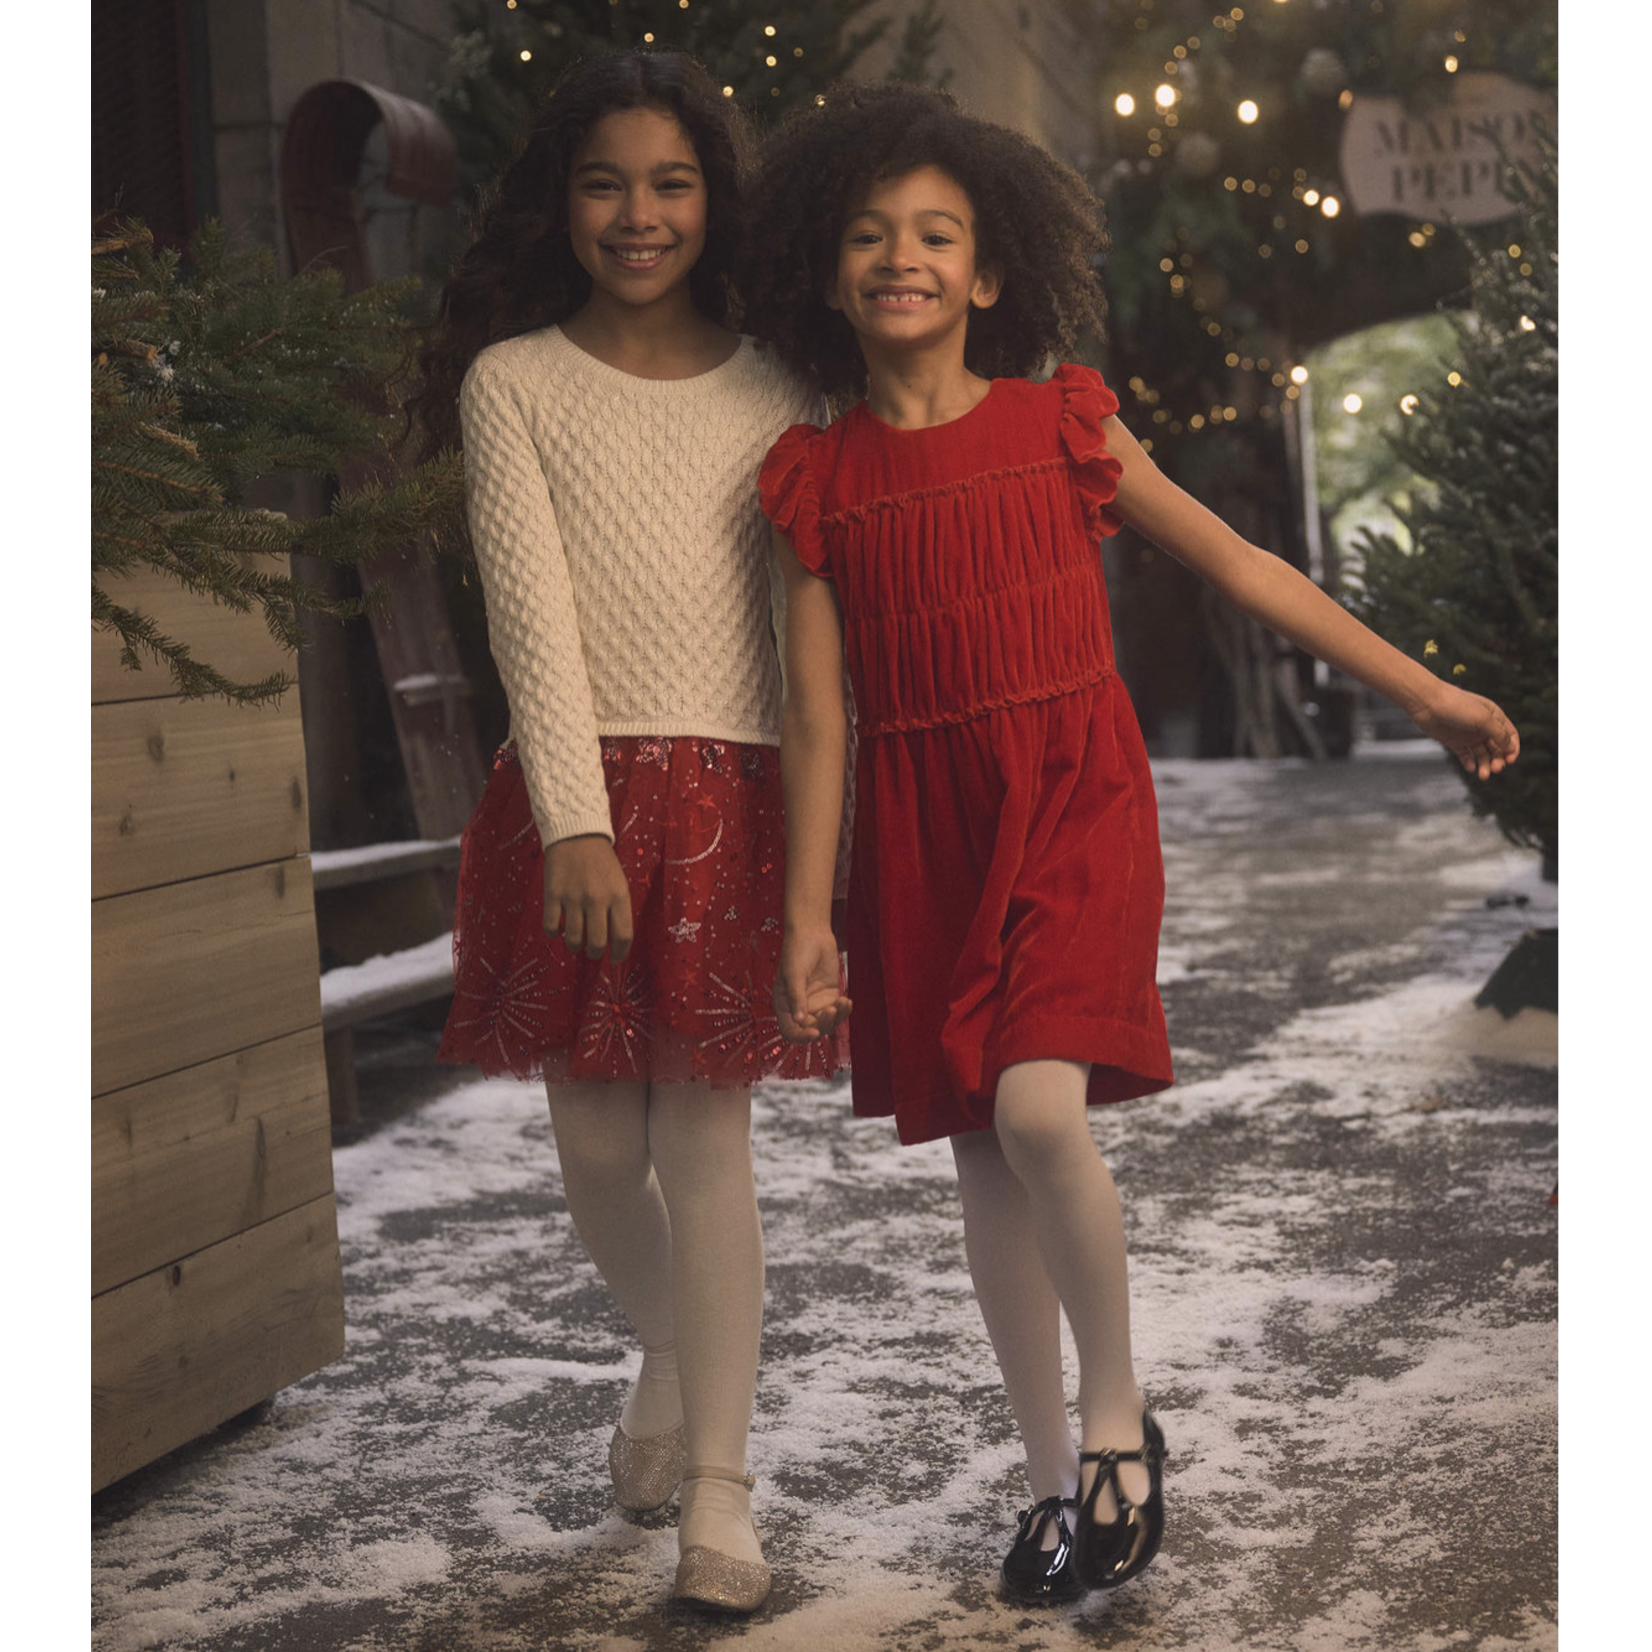 HATLEY RED SPARKLE SWEATER TULLE DRESS